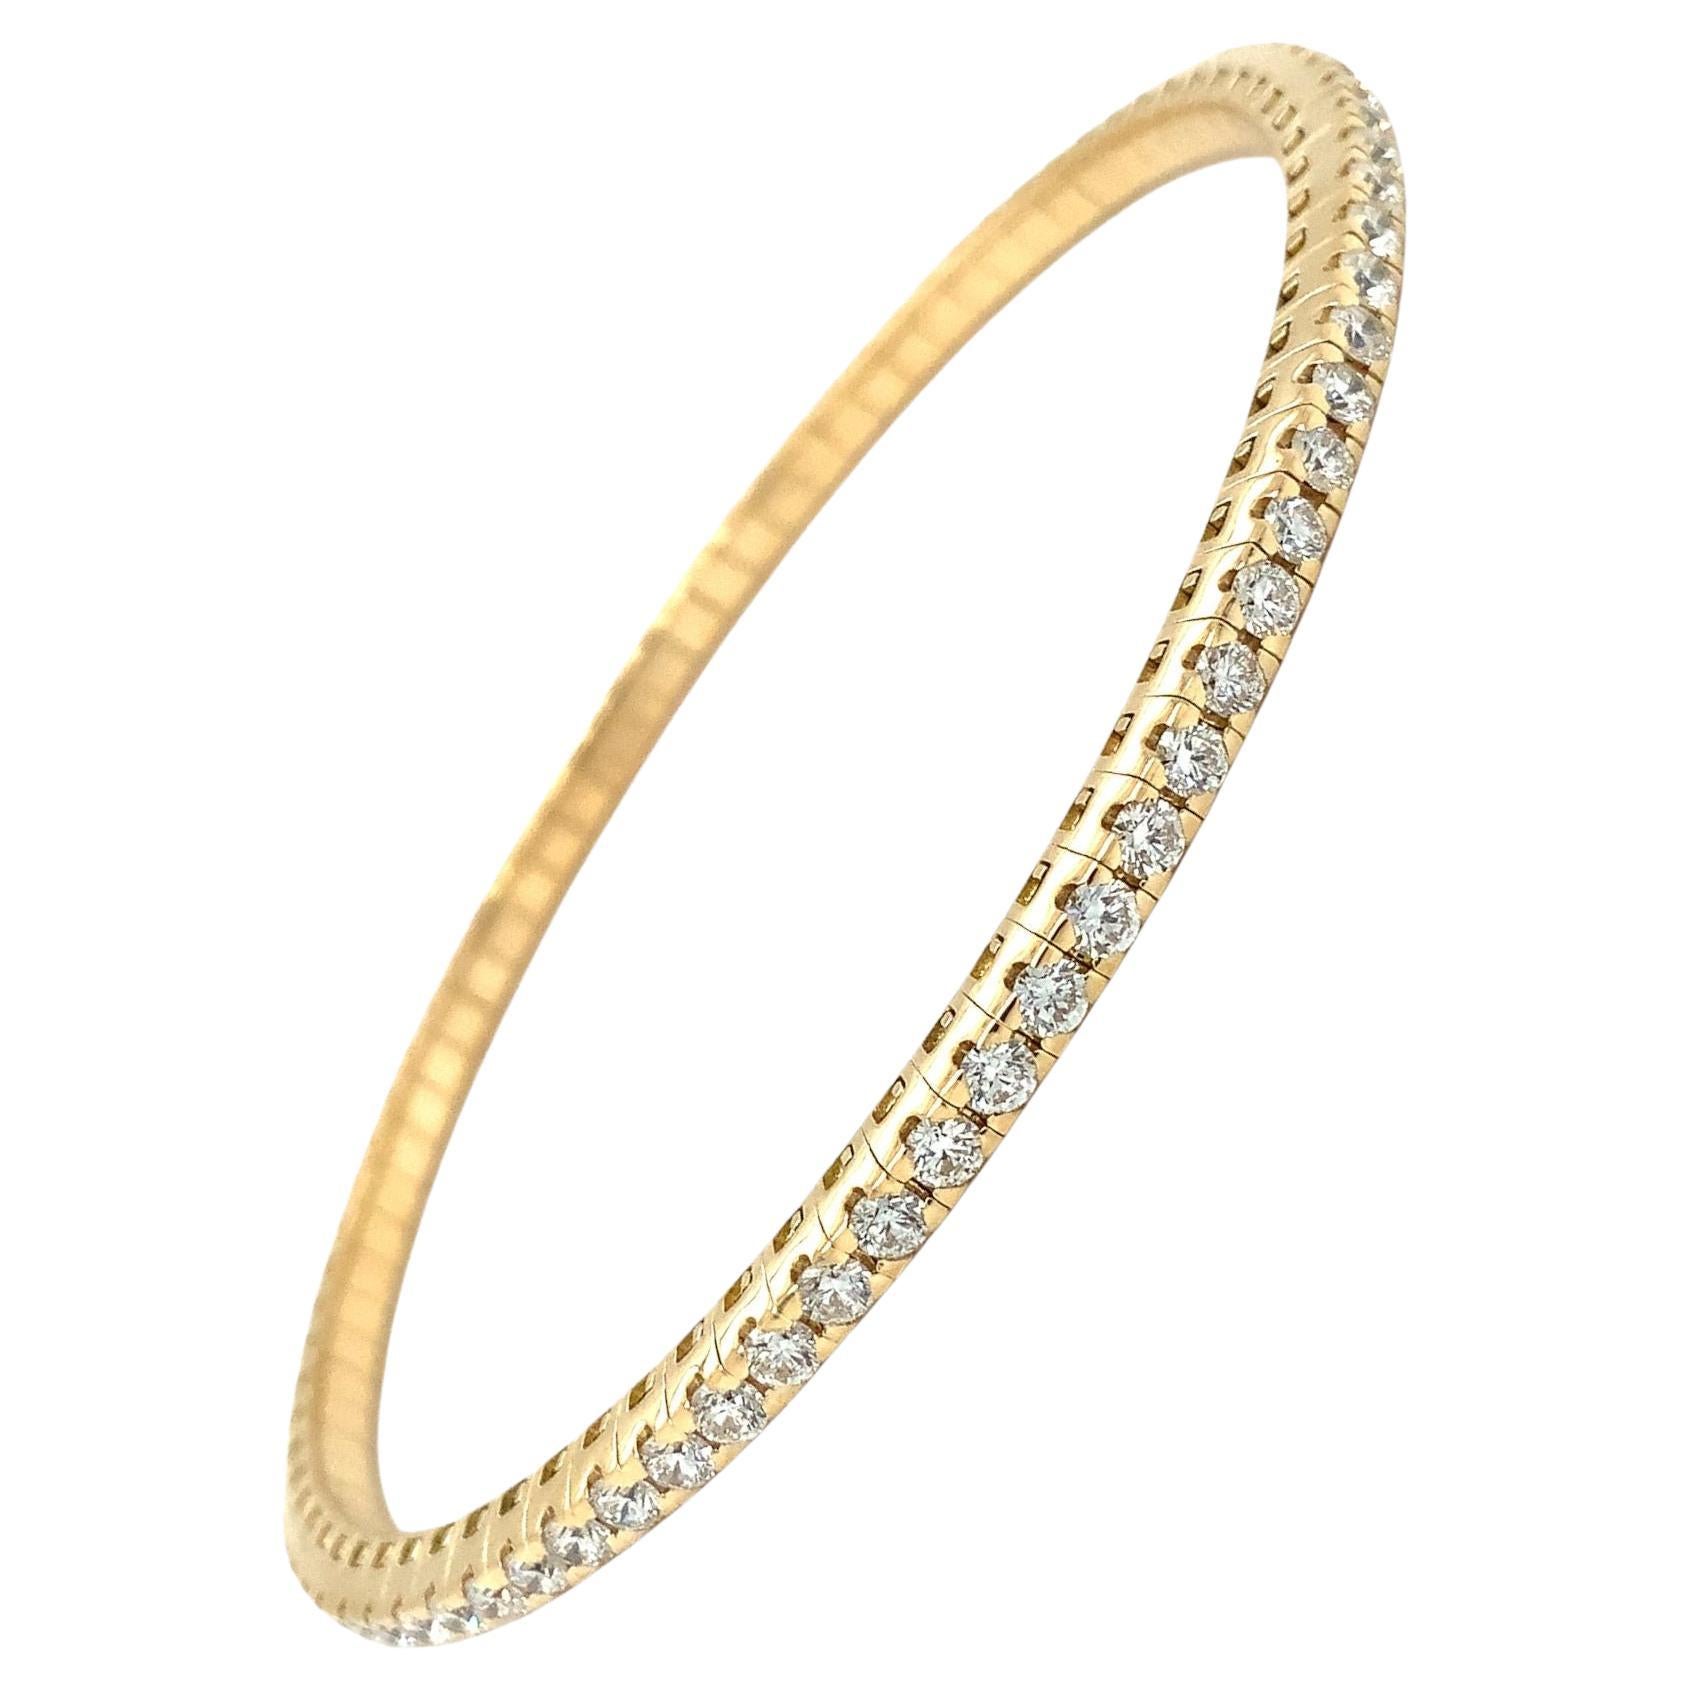 A Link Collection Classic Stretchy Diamond Bracelet 2.61ct Set in 18k Gold For Sale